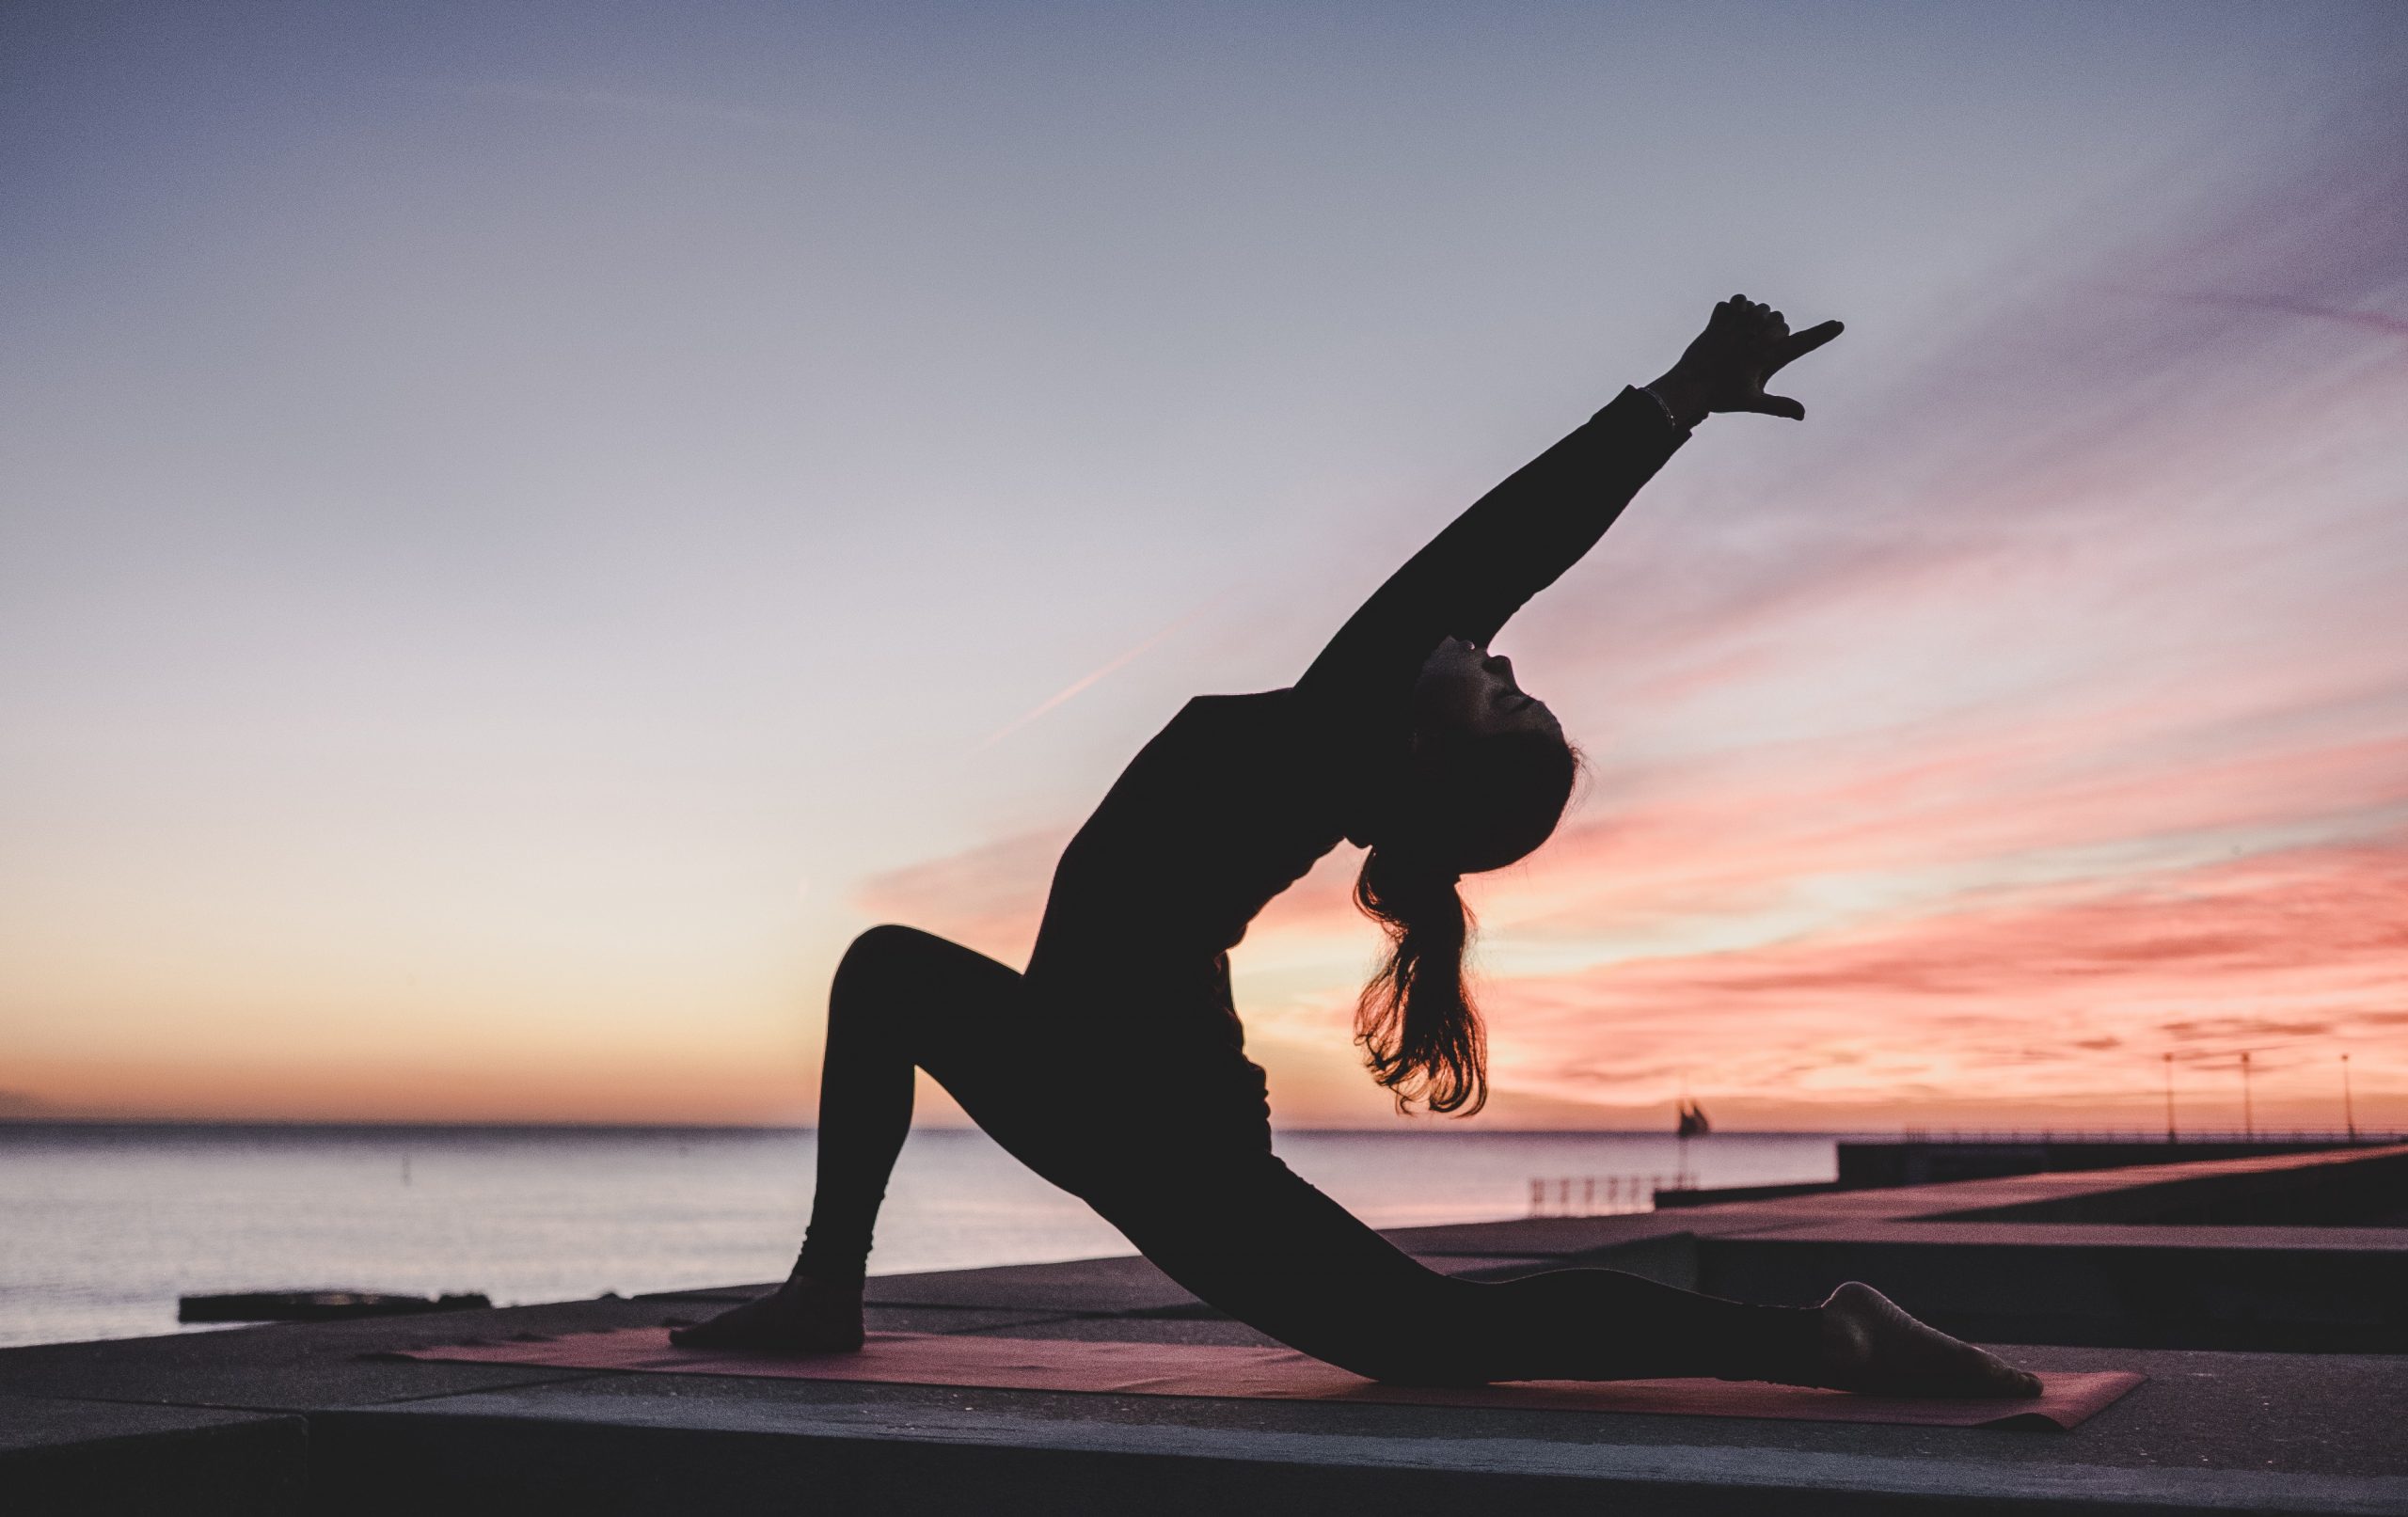 Want to Start Yoga? Here Are a Few Things to Consider